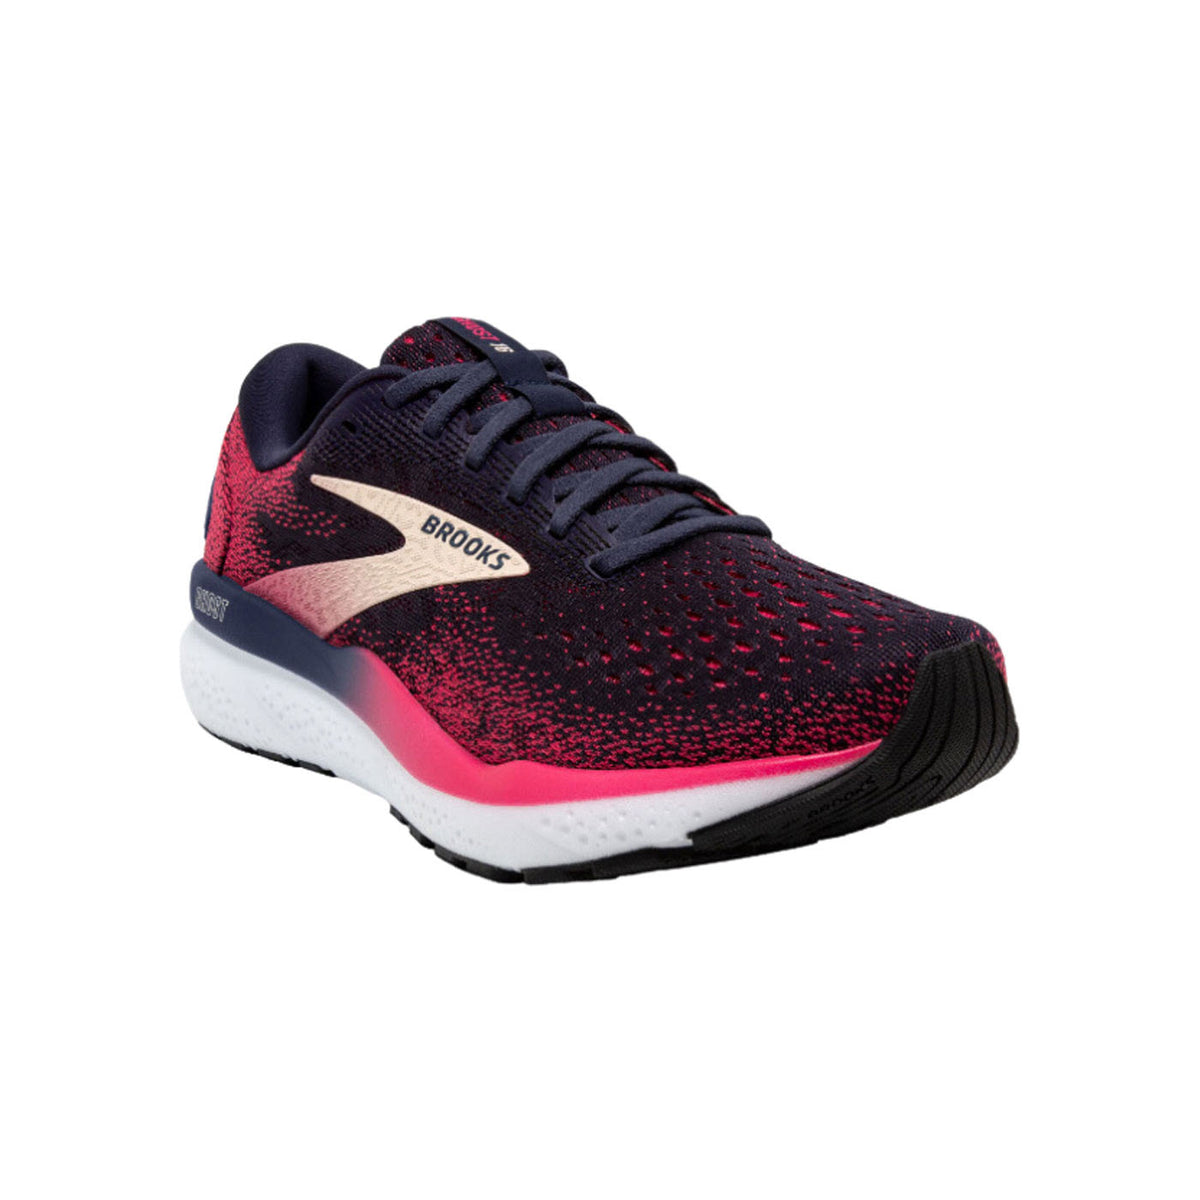 A Brooks Ghost 16 Peacoat/Raspberry/Apricot running shoe, featuring a dark blue and pink color scheme with a white sole and logo visible on the side. It incorporates a breathable mesh upper for enhanced airflow and comfort.